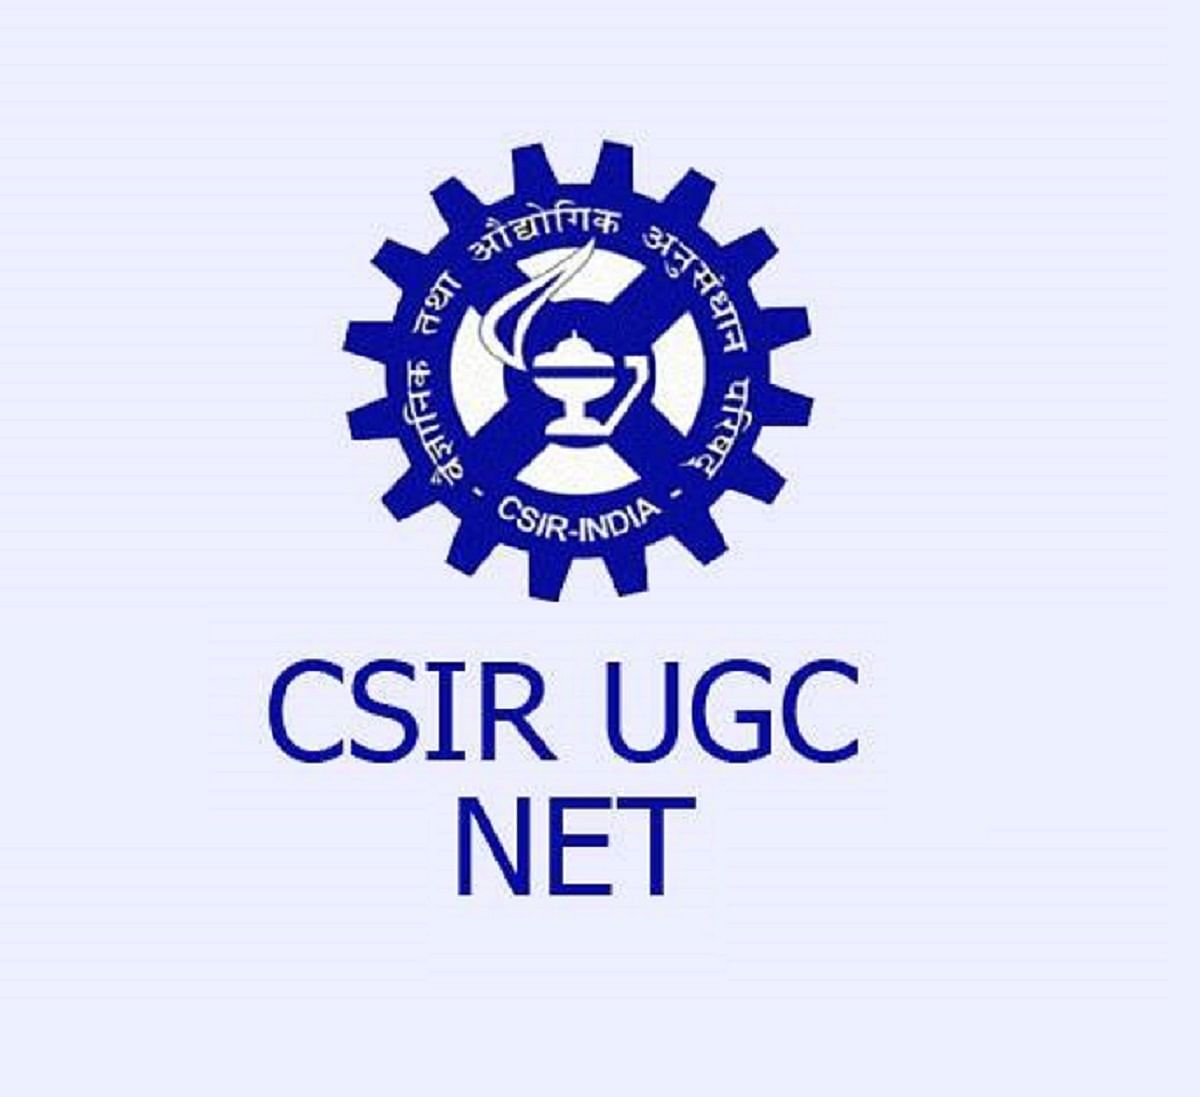 CSIR UGC NET 2022: NTA Begins Application Process, Know Eligibility Criteria and Exam Pattern Here